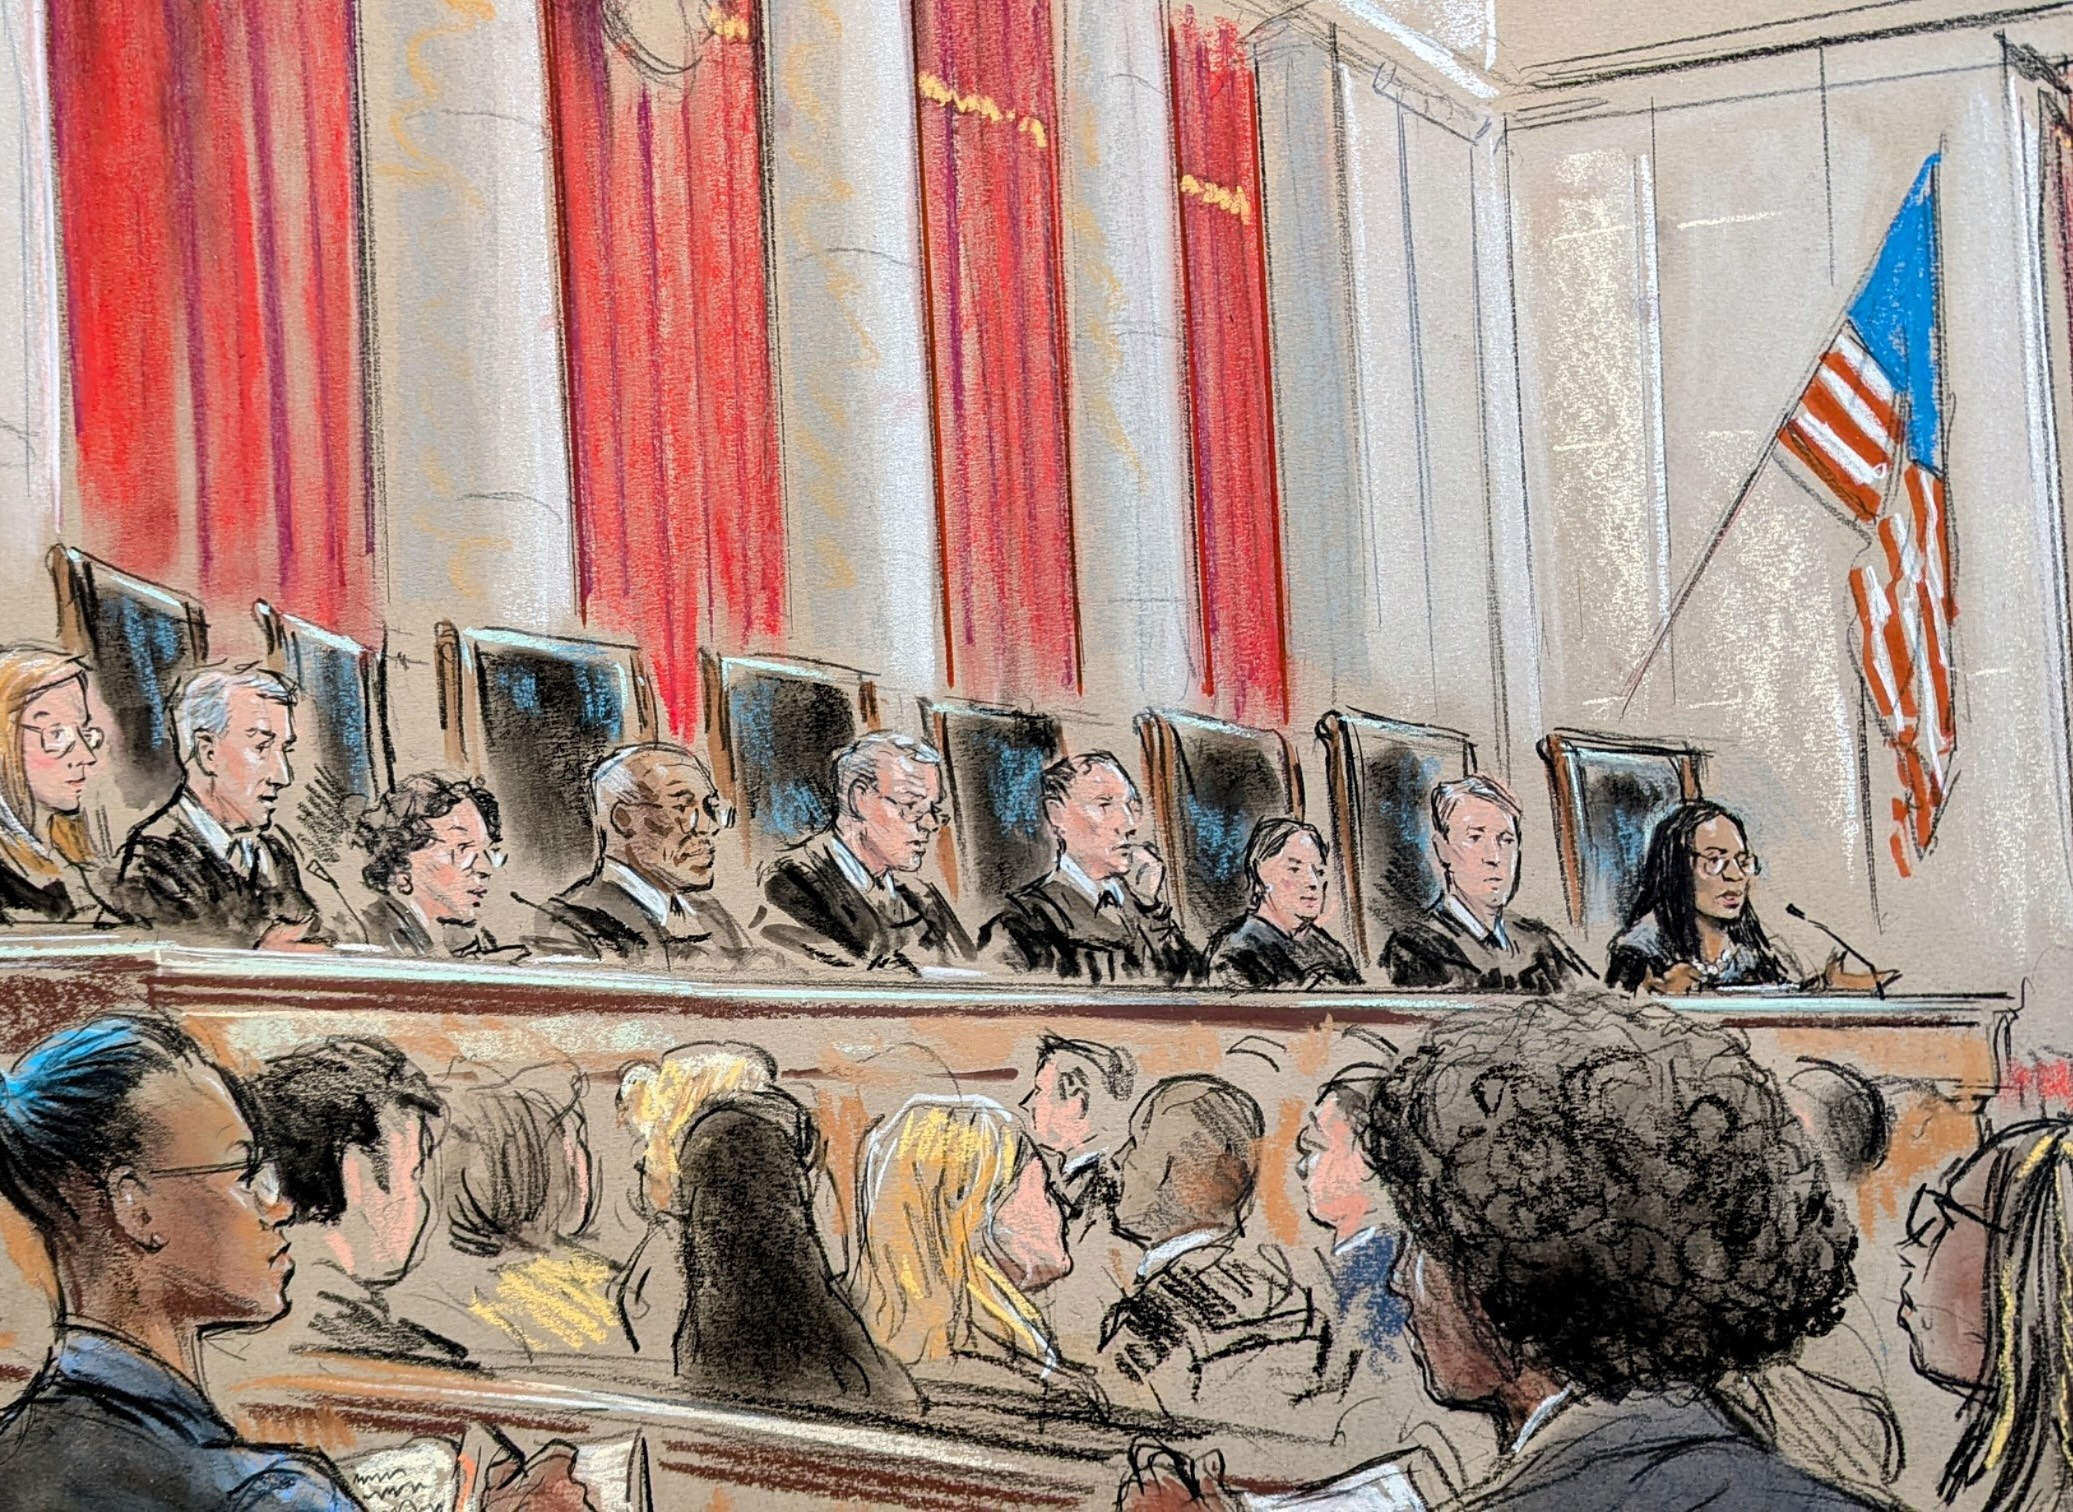 Nine justices on the bench speaking to a listening courtroom